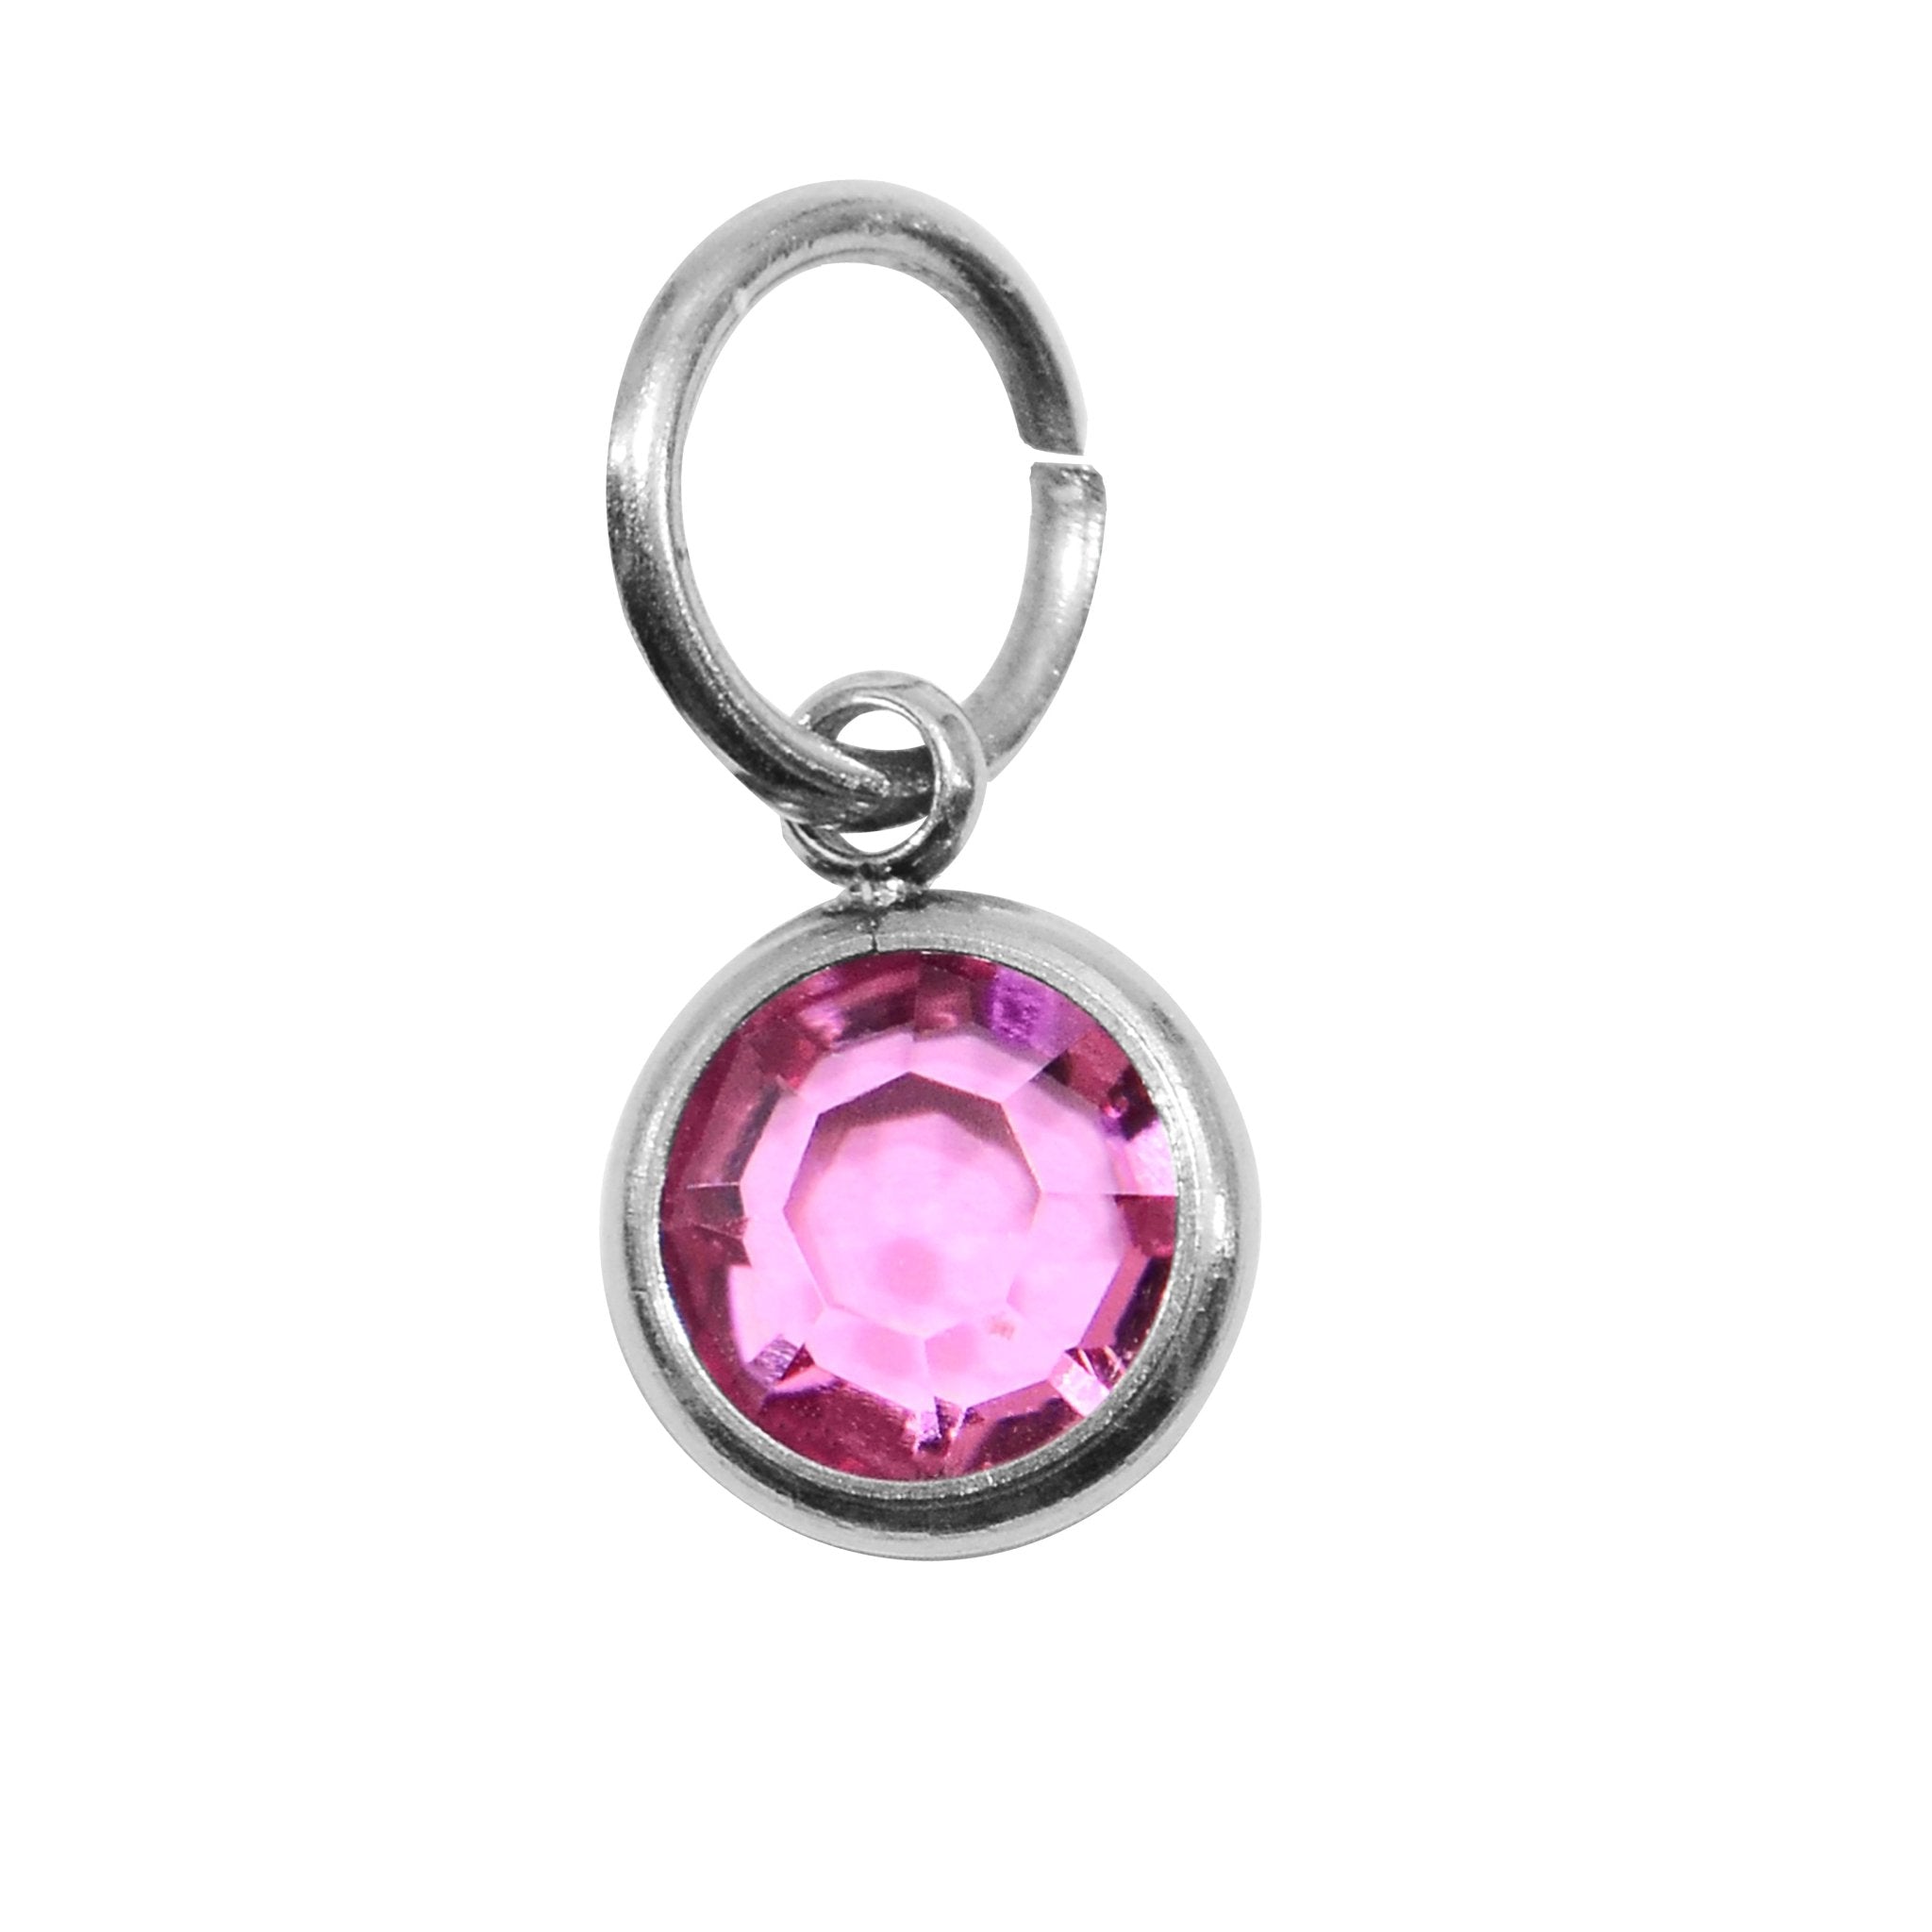 9th SILVER Hanging Birthstone Charm (Optional) - Options Variants